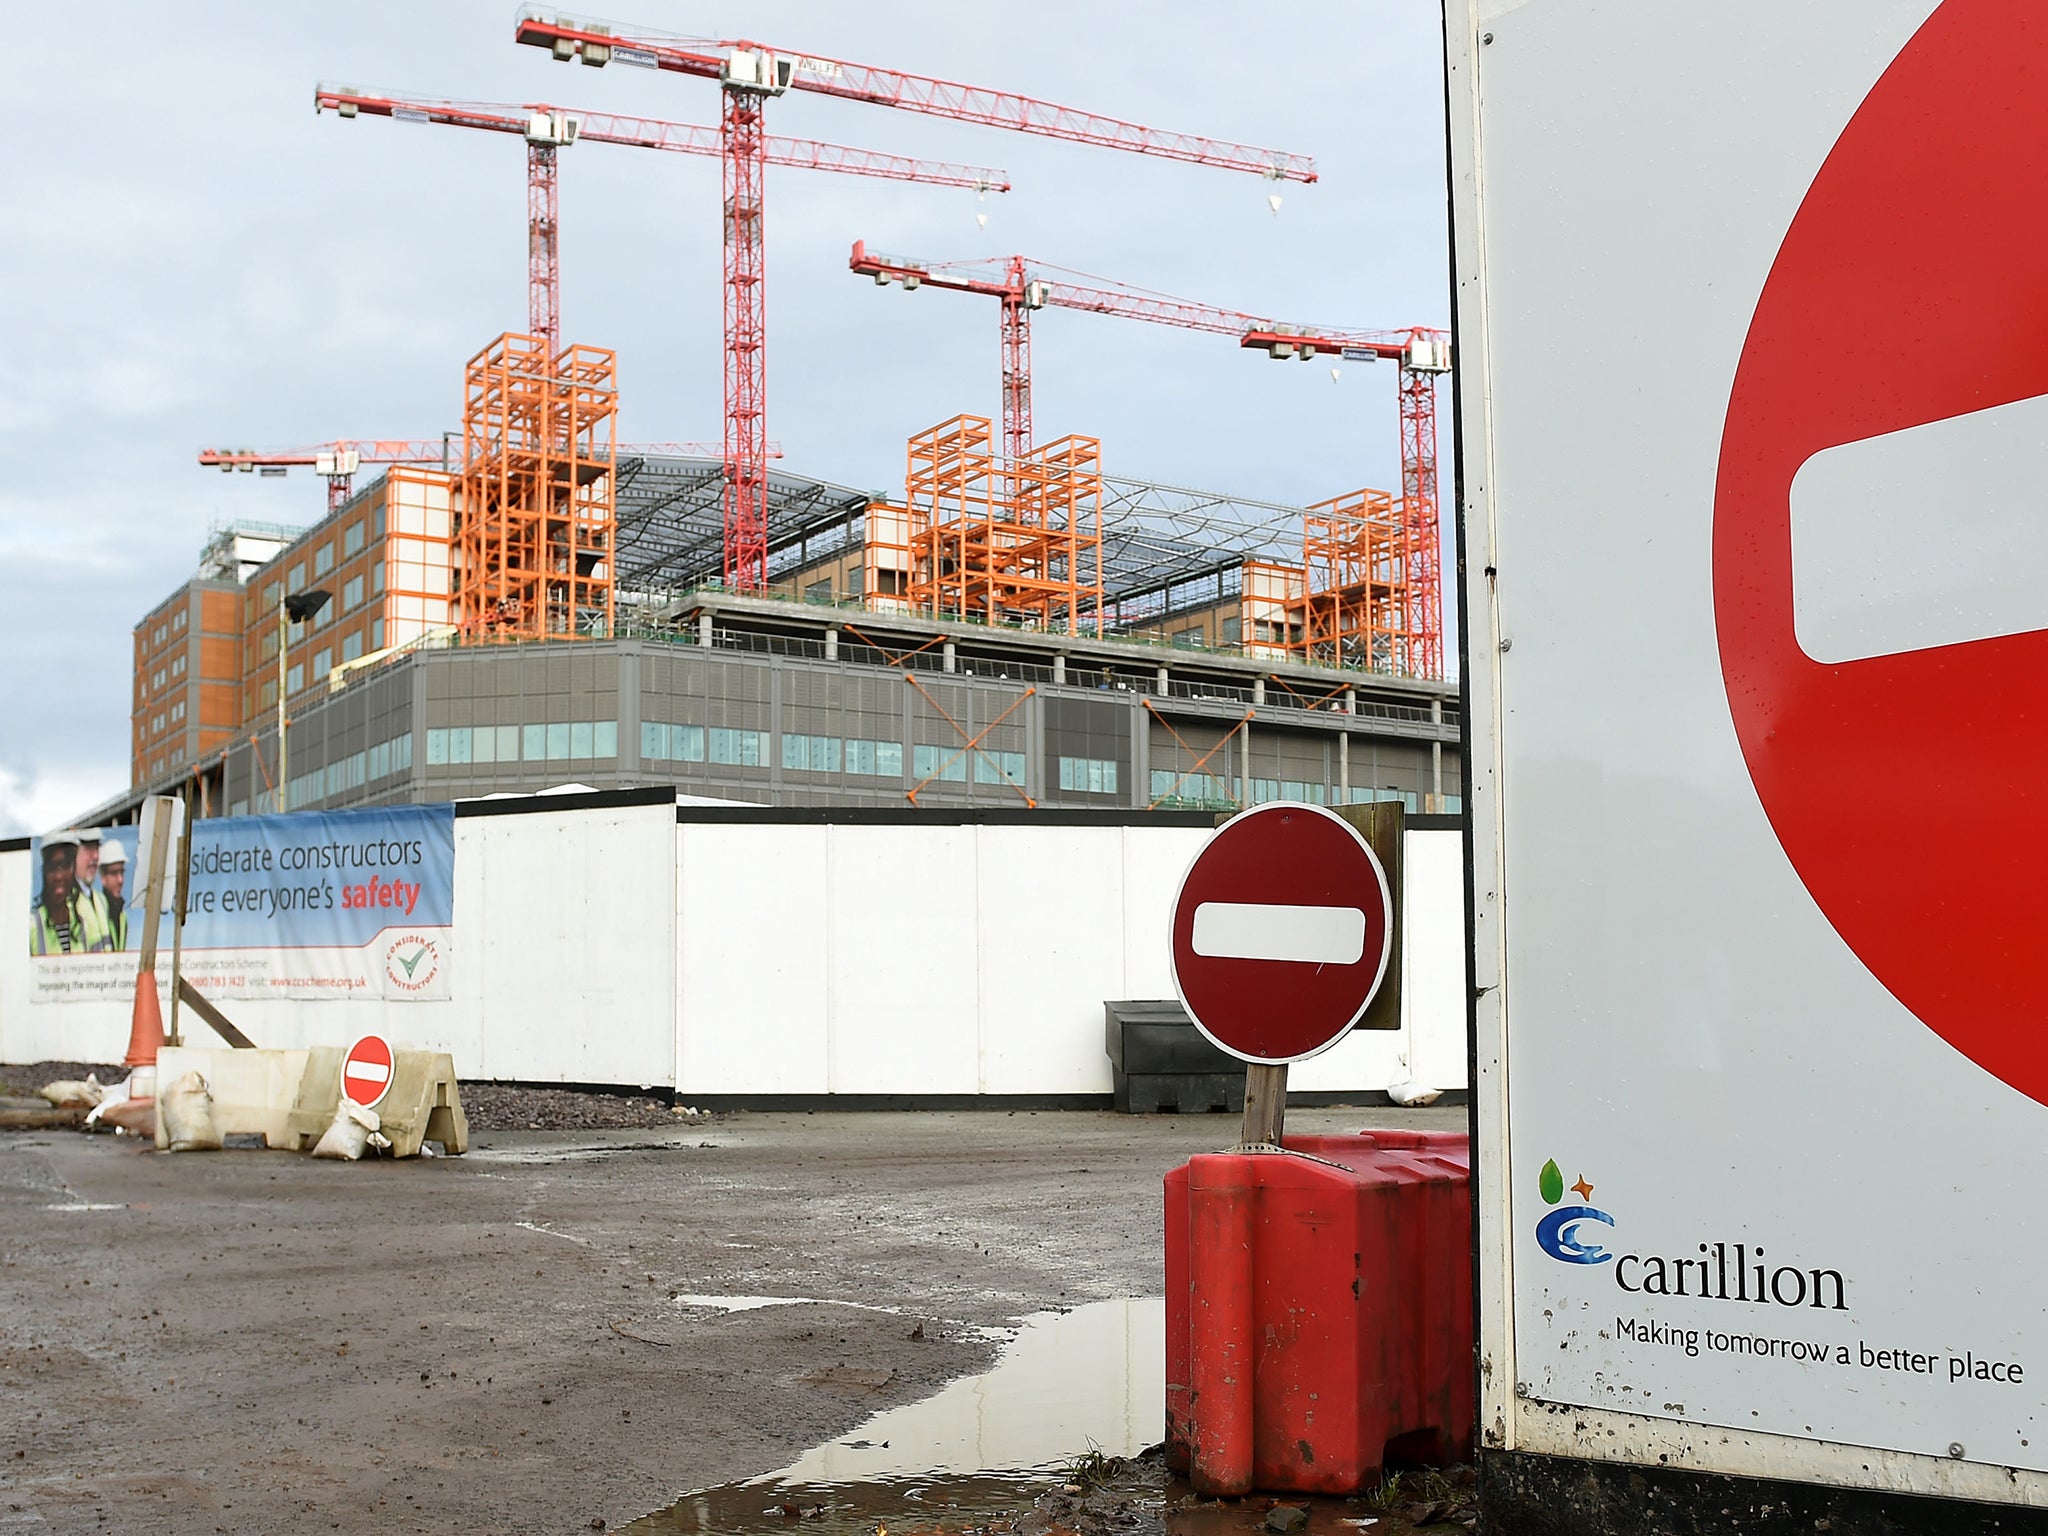 The most lucrative sale was of three NHS hospital buildings in Staffordshire, Swindon and Glasgow in 2007 which netted Carillion a 38.7 per cent annual return